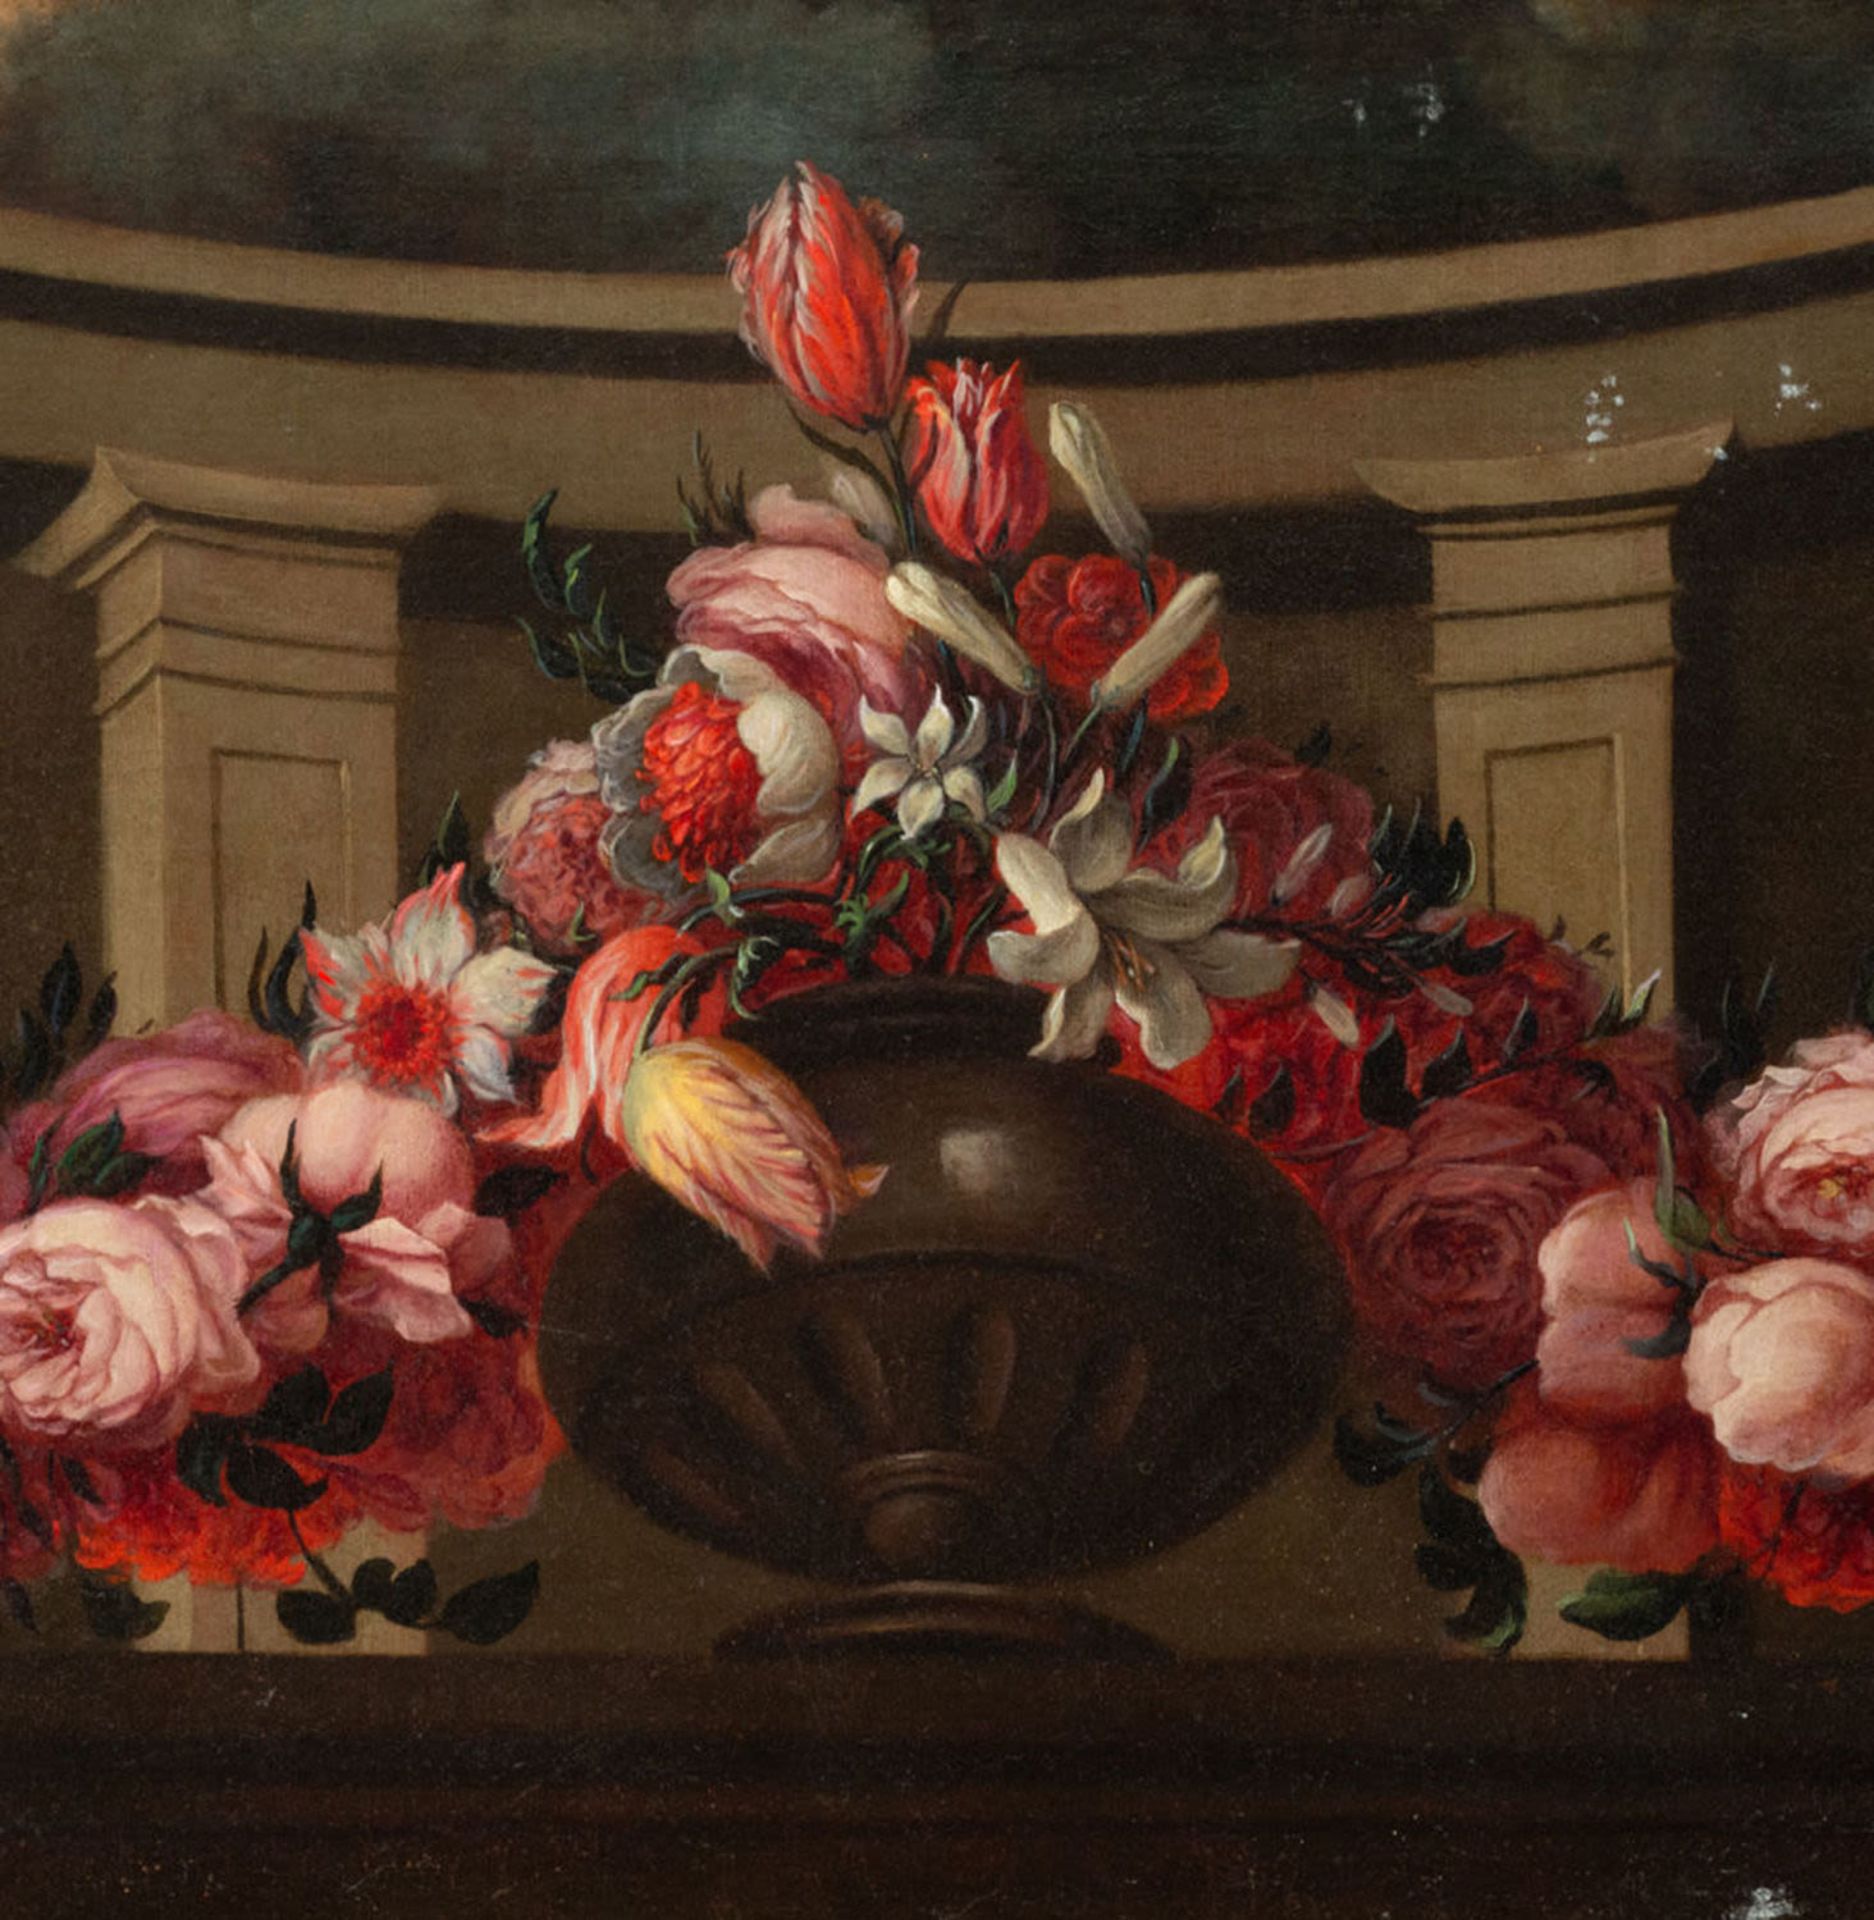 Garland of Flowers with Caprice in the background, Italian school of the 17th century - Image 4 of 4